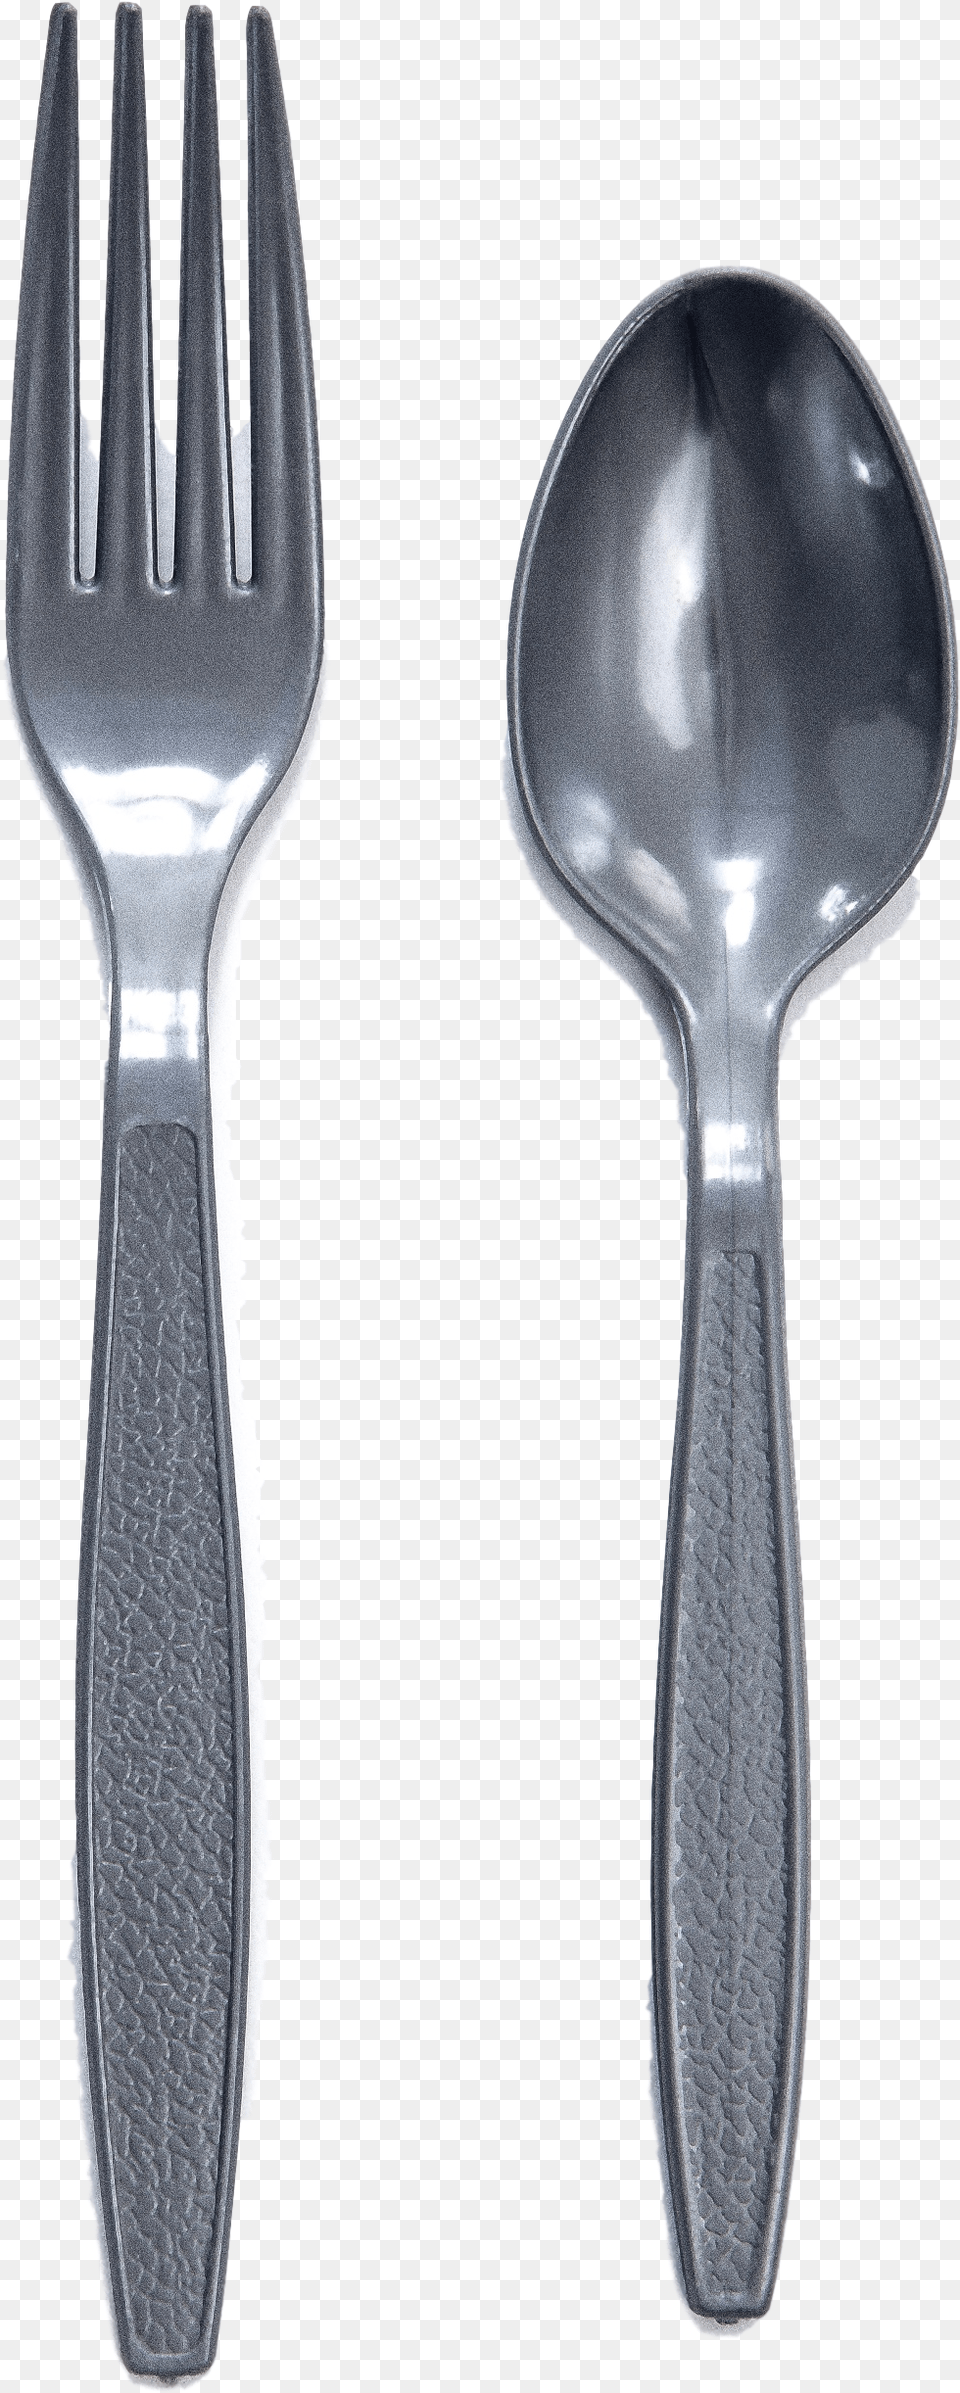 Knife, Cutlery, Fork, Spoon Png Image